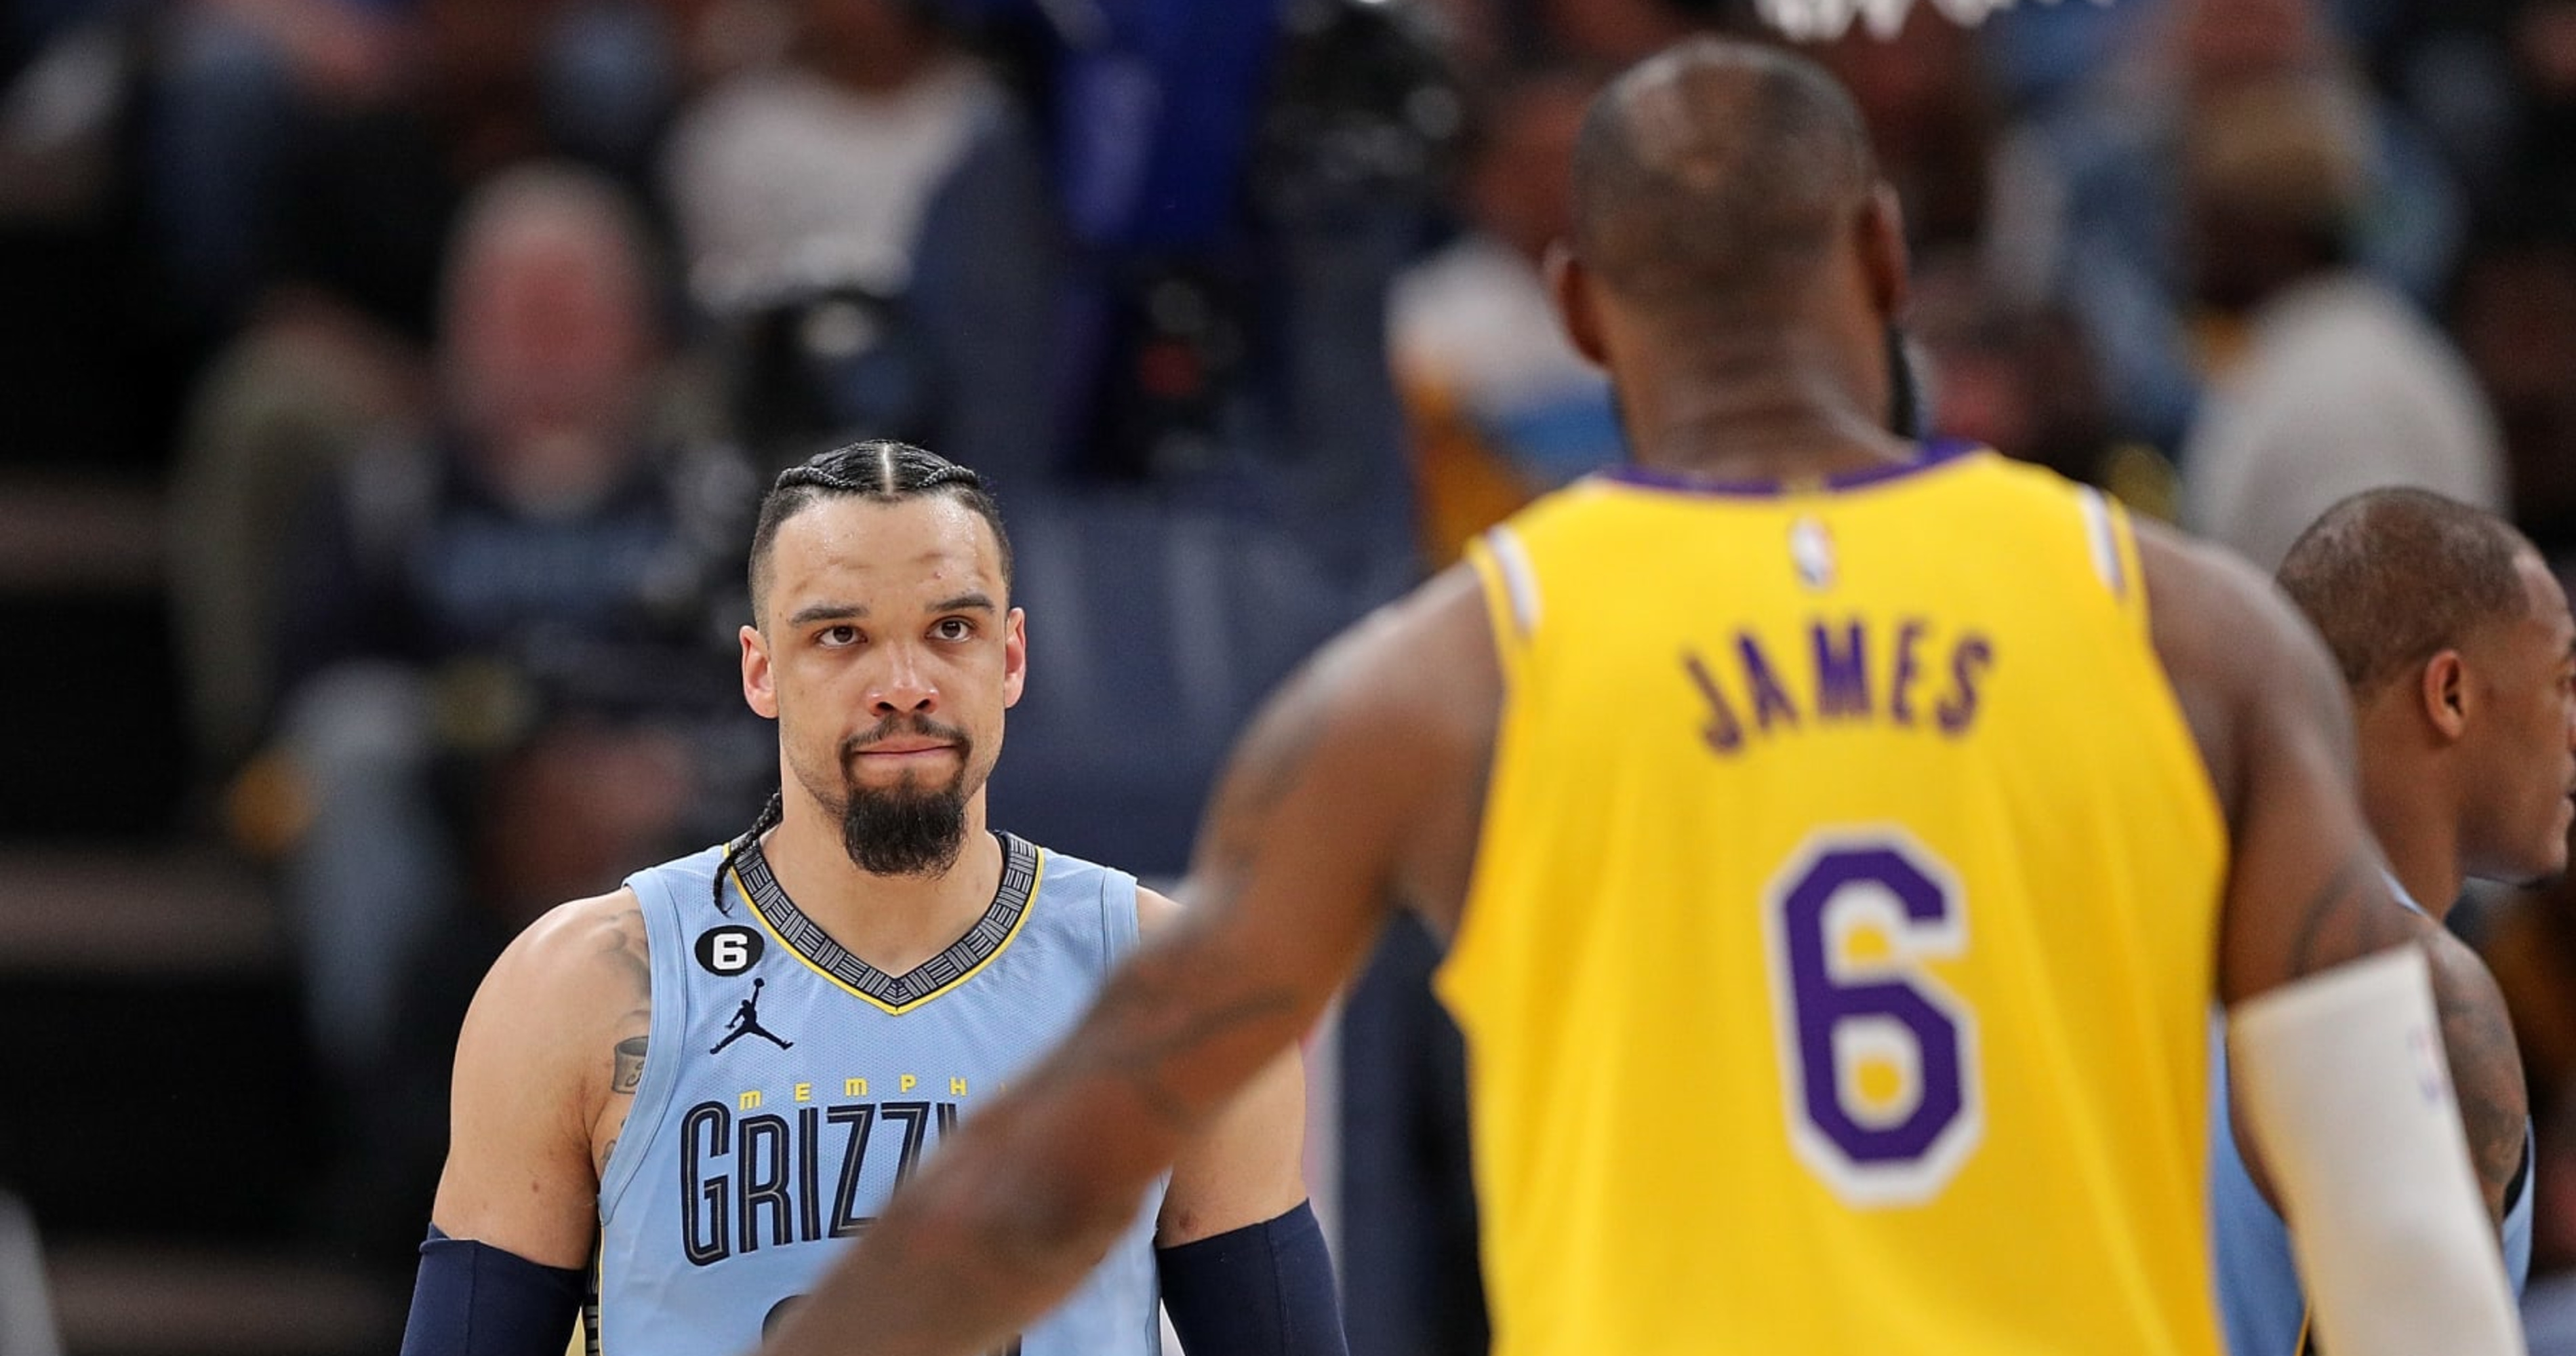 LeBron James refuses to greet Grizzlies after Lakers win by 40